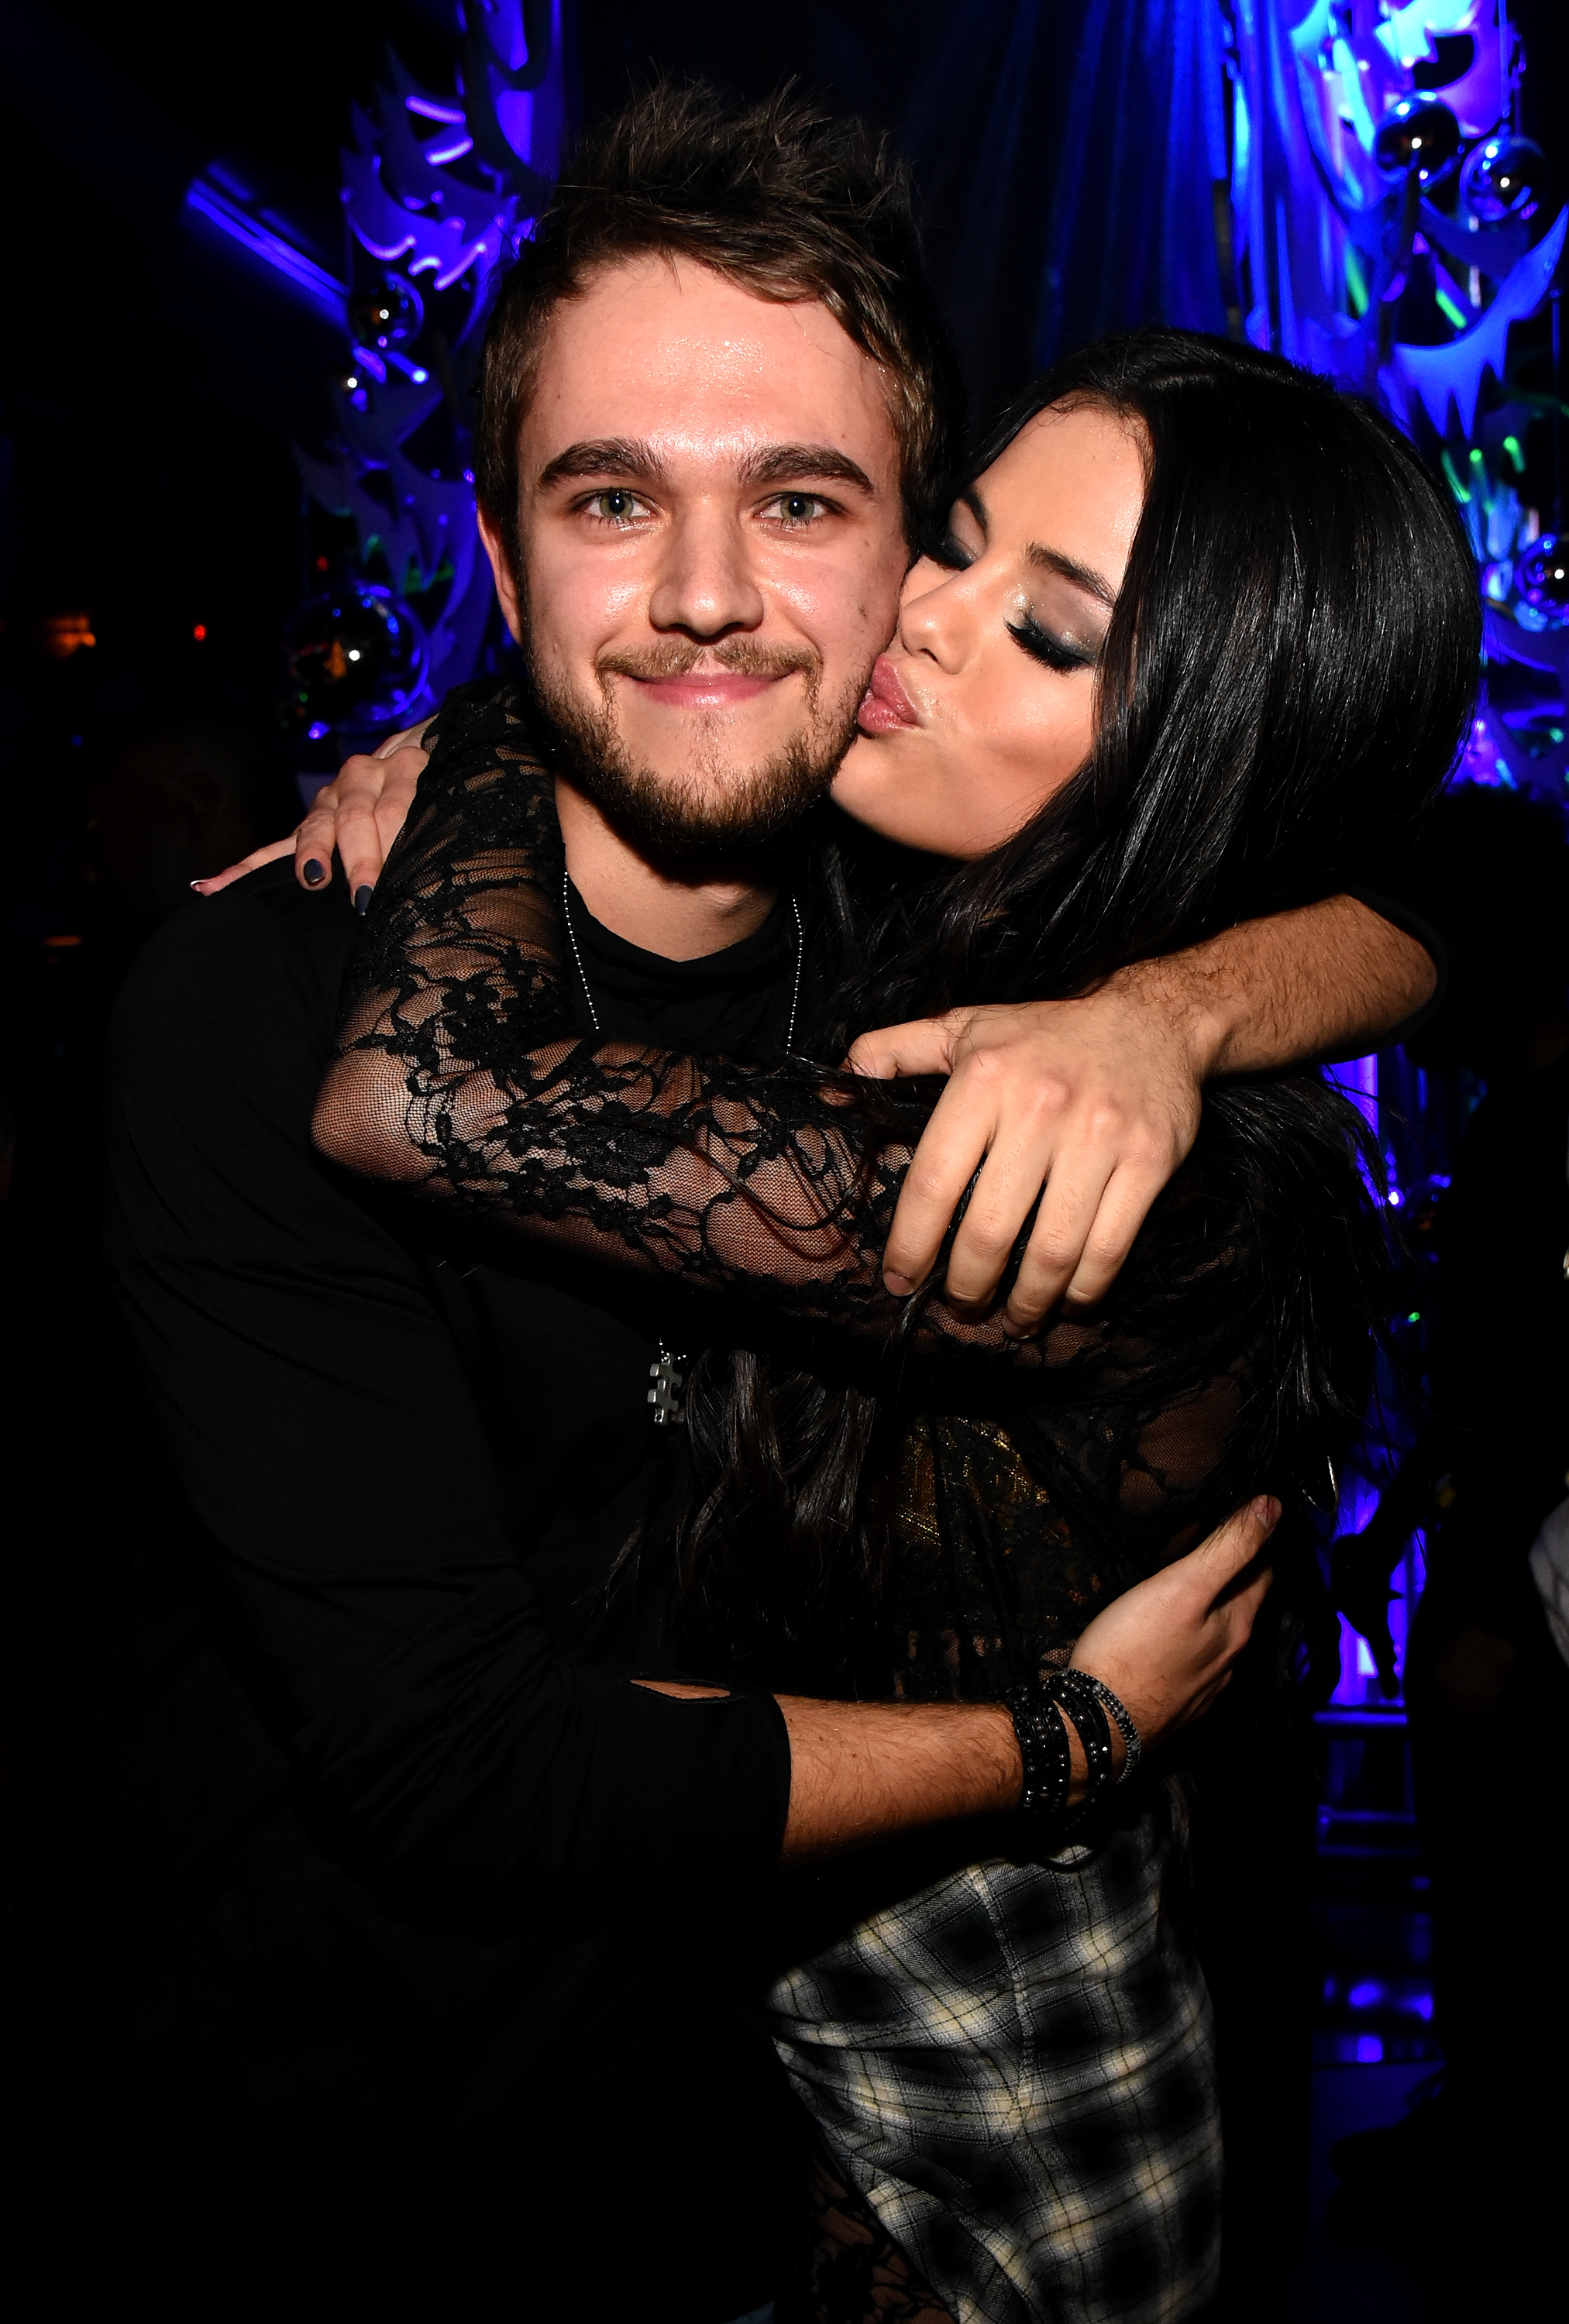 Zedd and Selena Gomez attend Z100's Jingle Ball 2015 at Madison Square Garden on December 11, 2015, in New York City. | Source: Getty Images